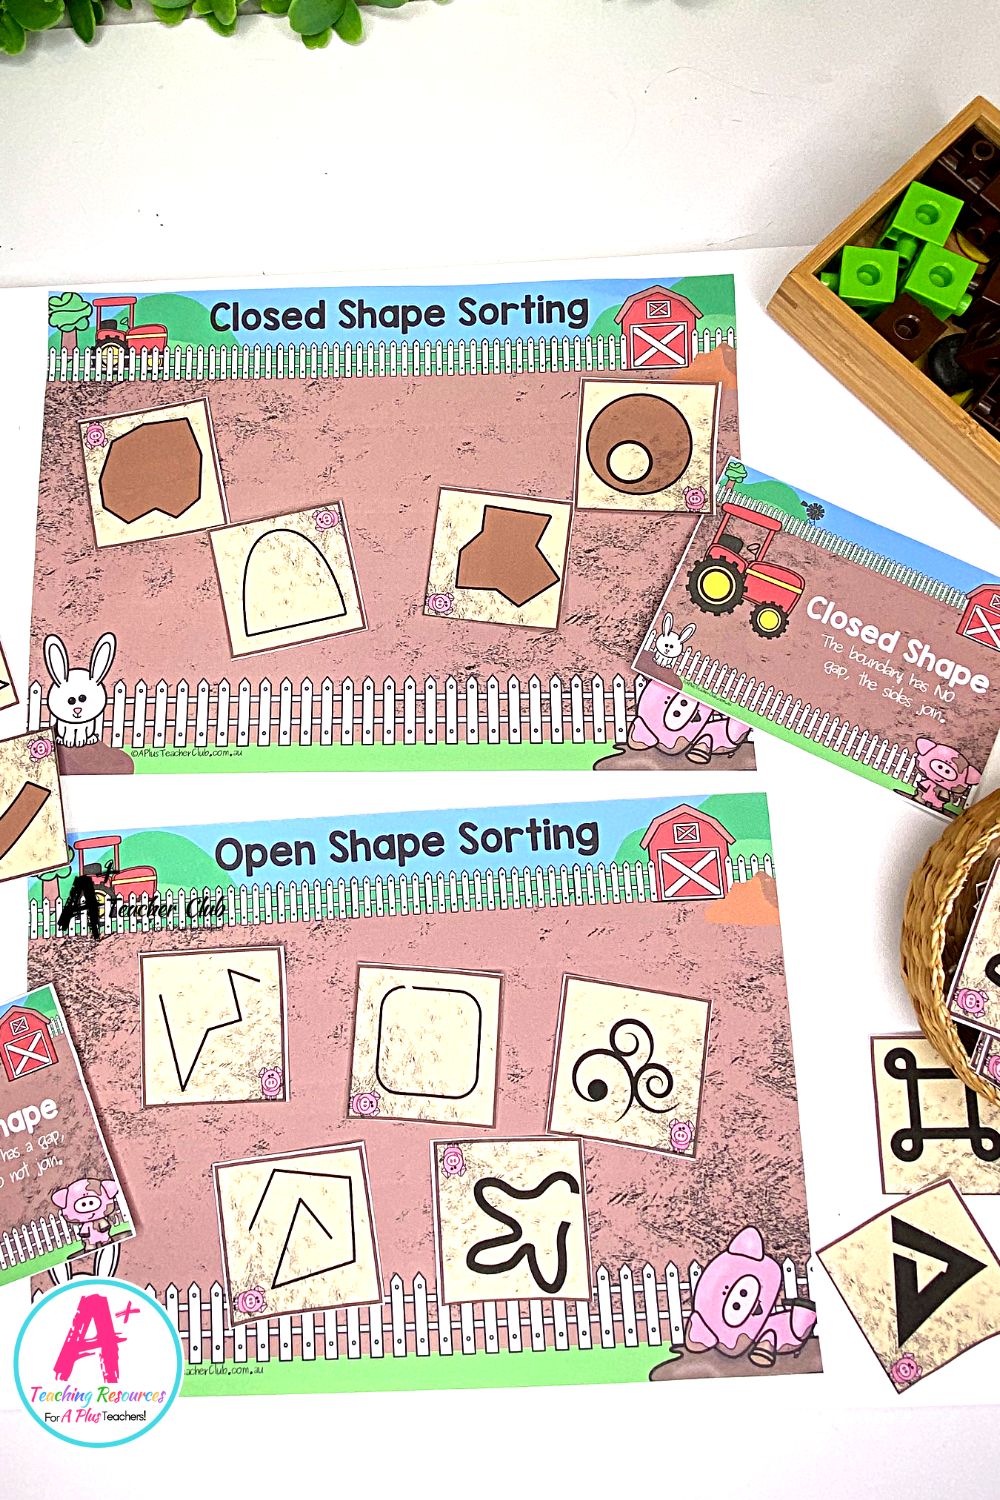 Non-Standard Area Piggy Open Closed Shapes Sorting Mats